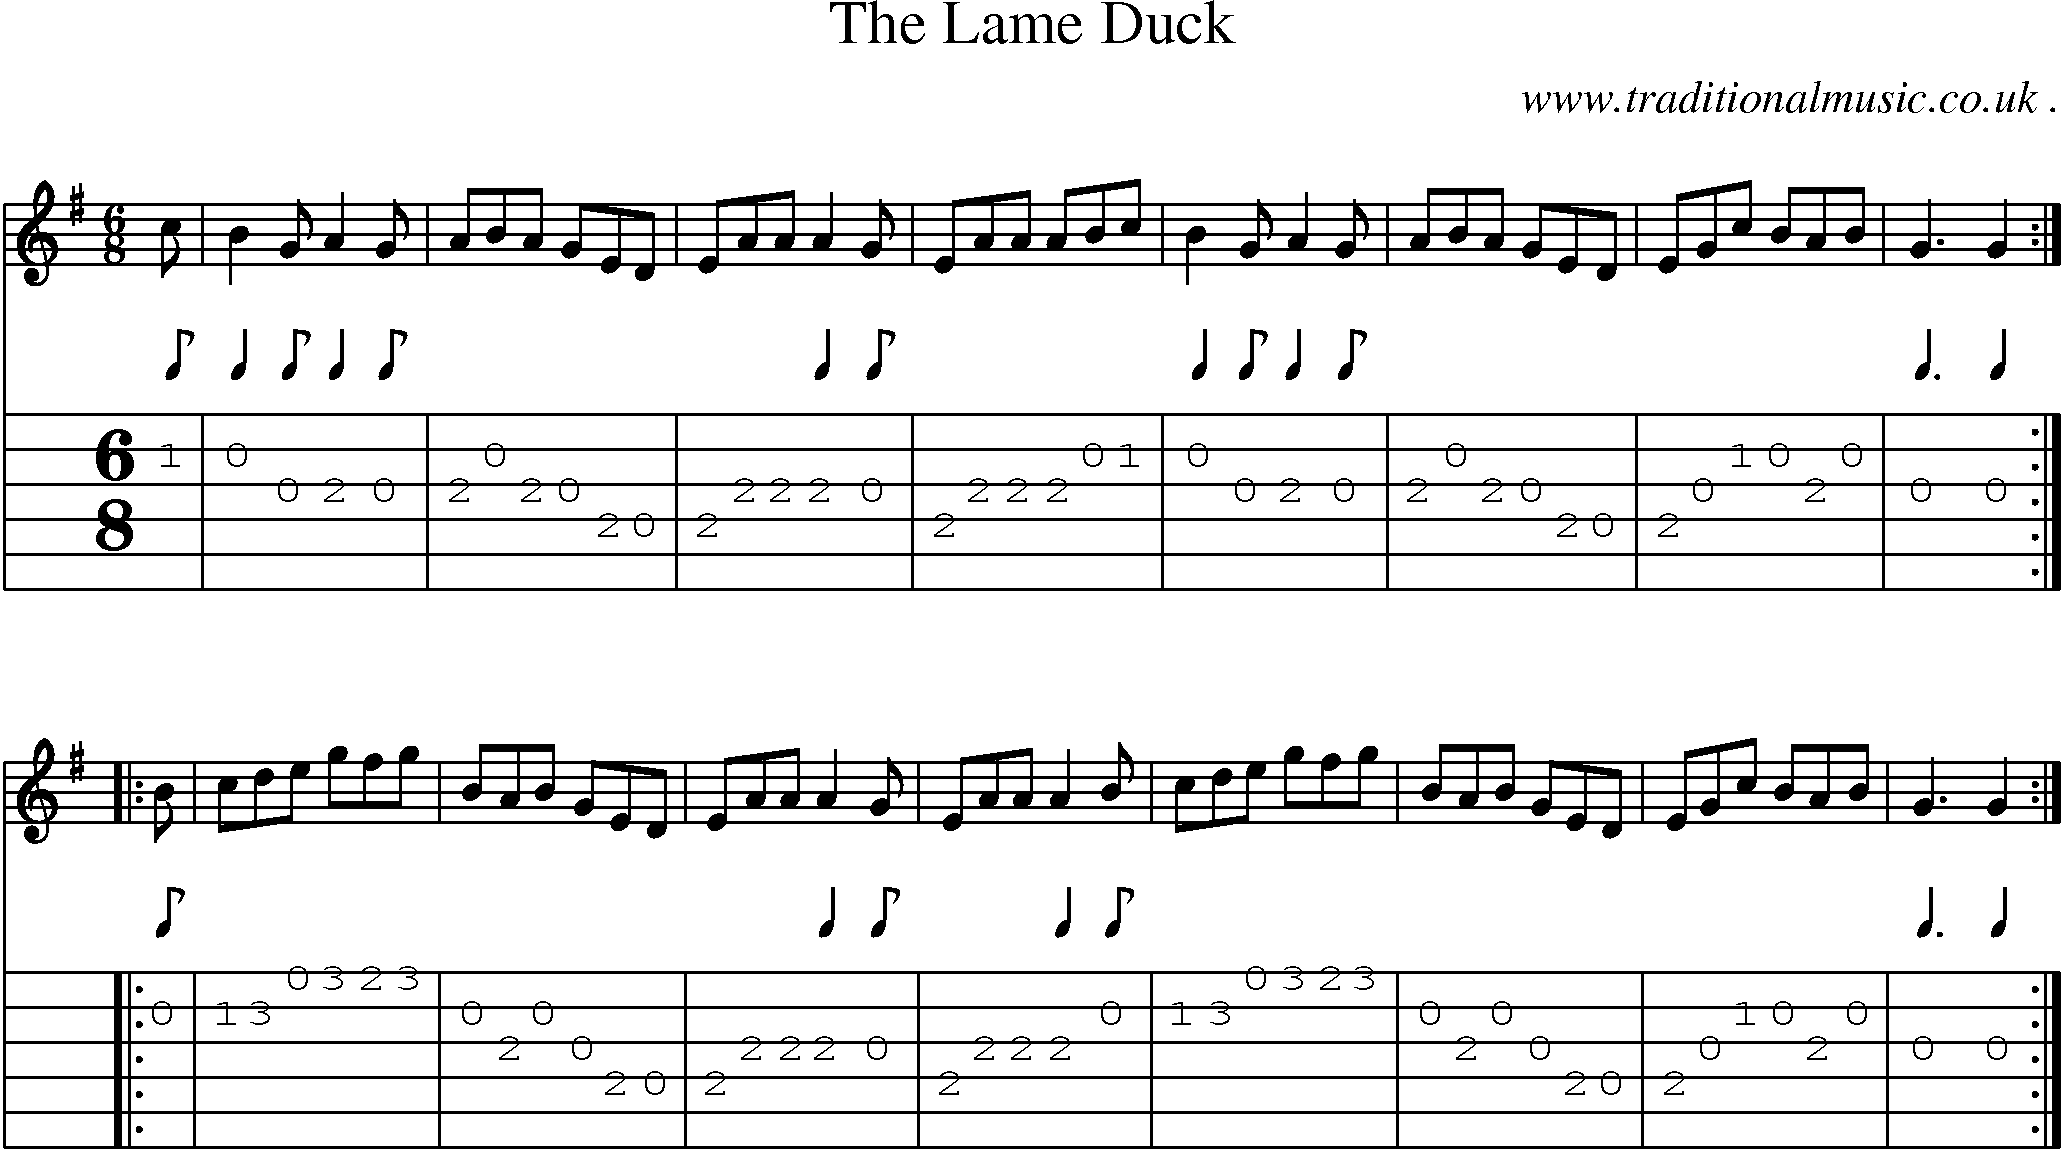 Sheet-music  score, Chords and Guitar Tabs for The Lame Duck